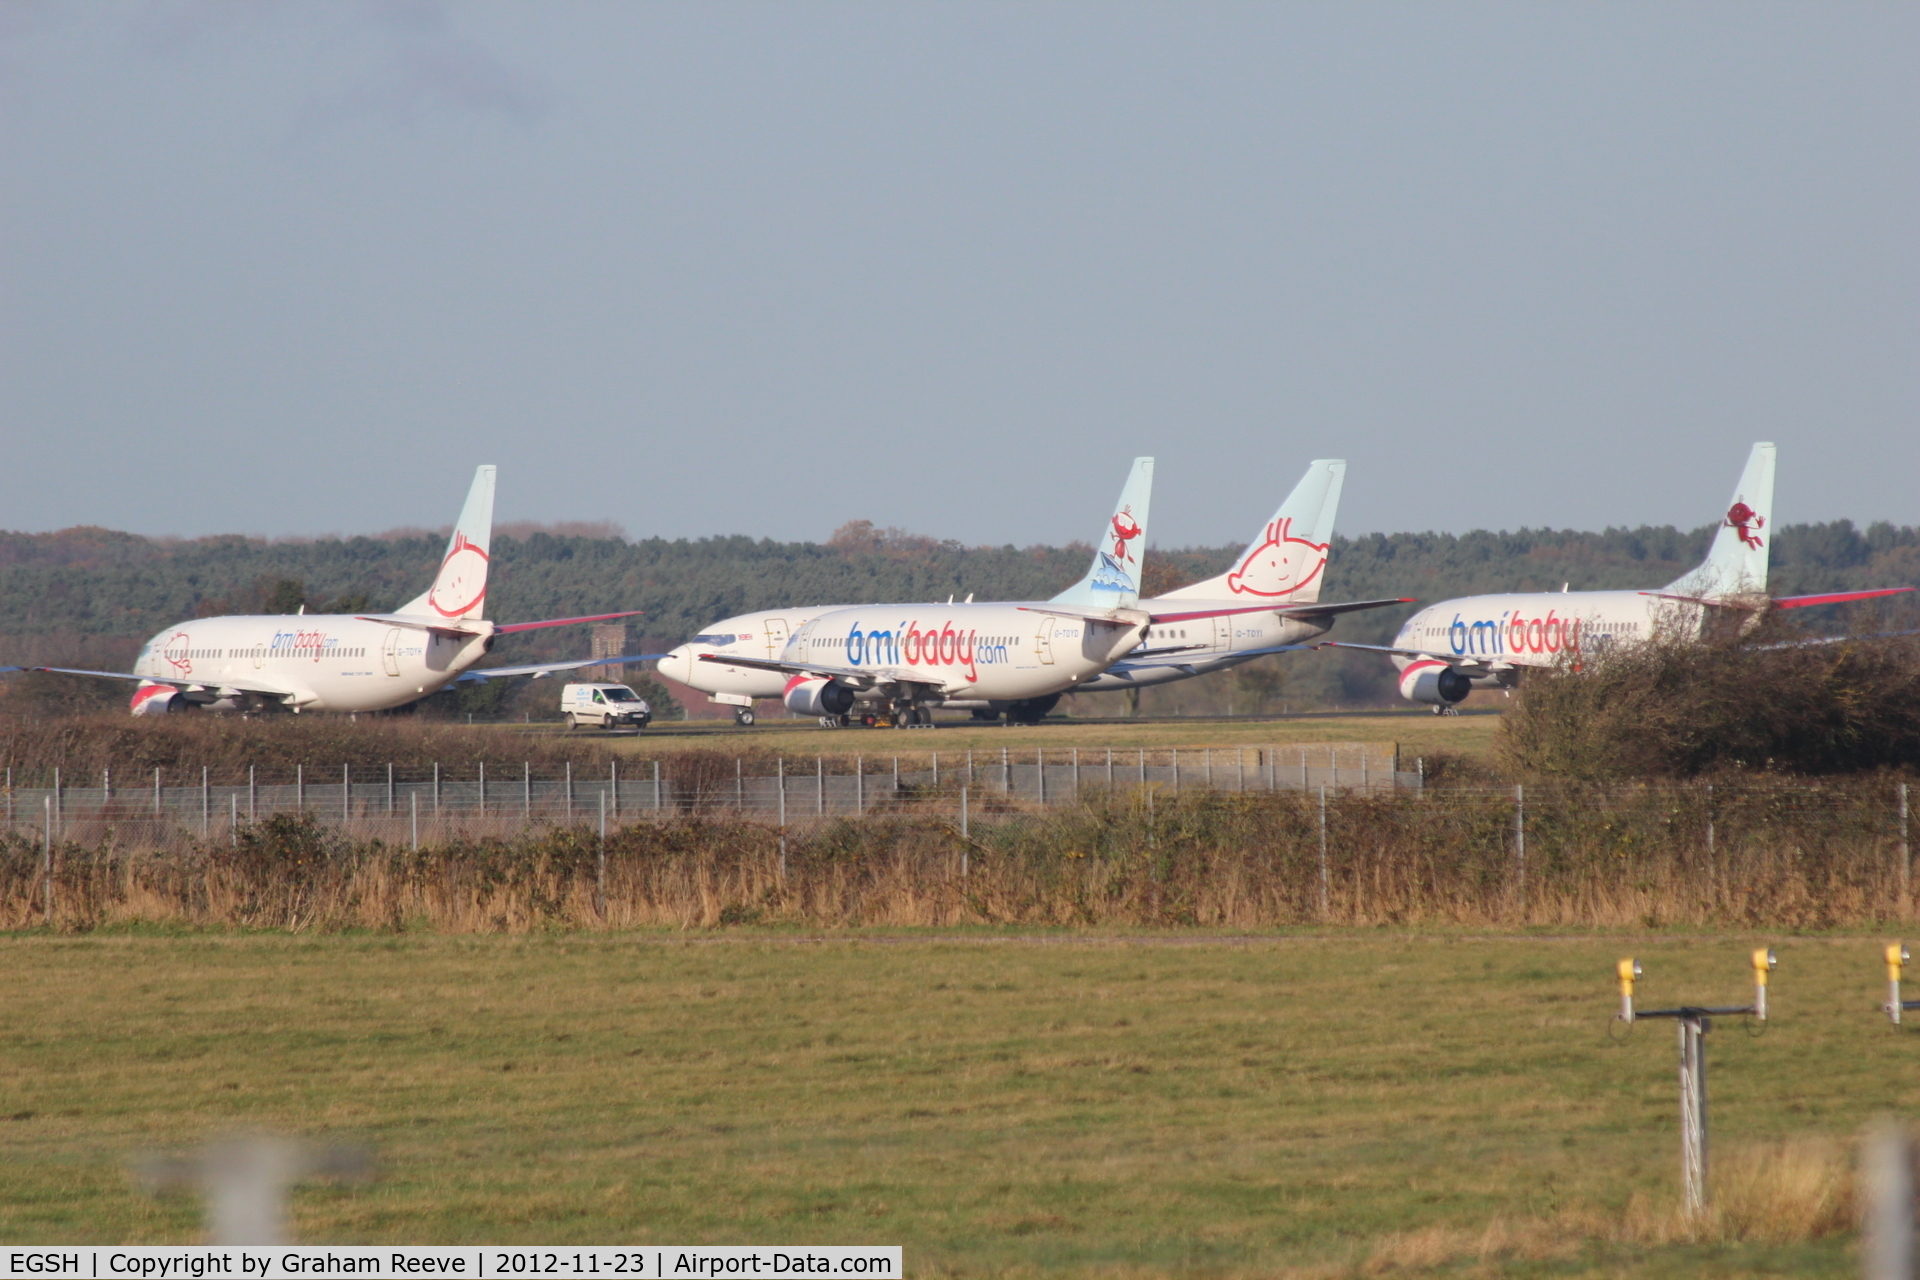 Norwich International Airport, Norwich, England United Kingdom (EGSH) - Some of the BMI Baby 737's stored at Norwich.